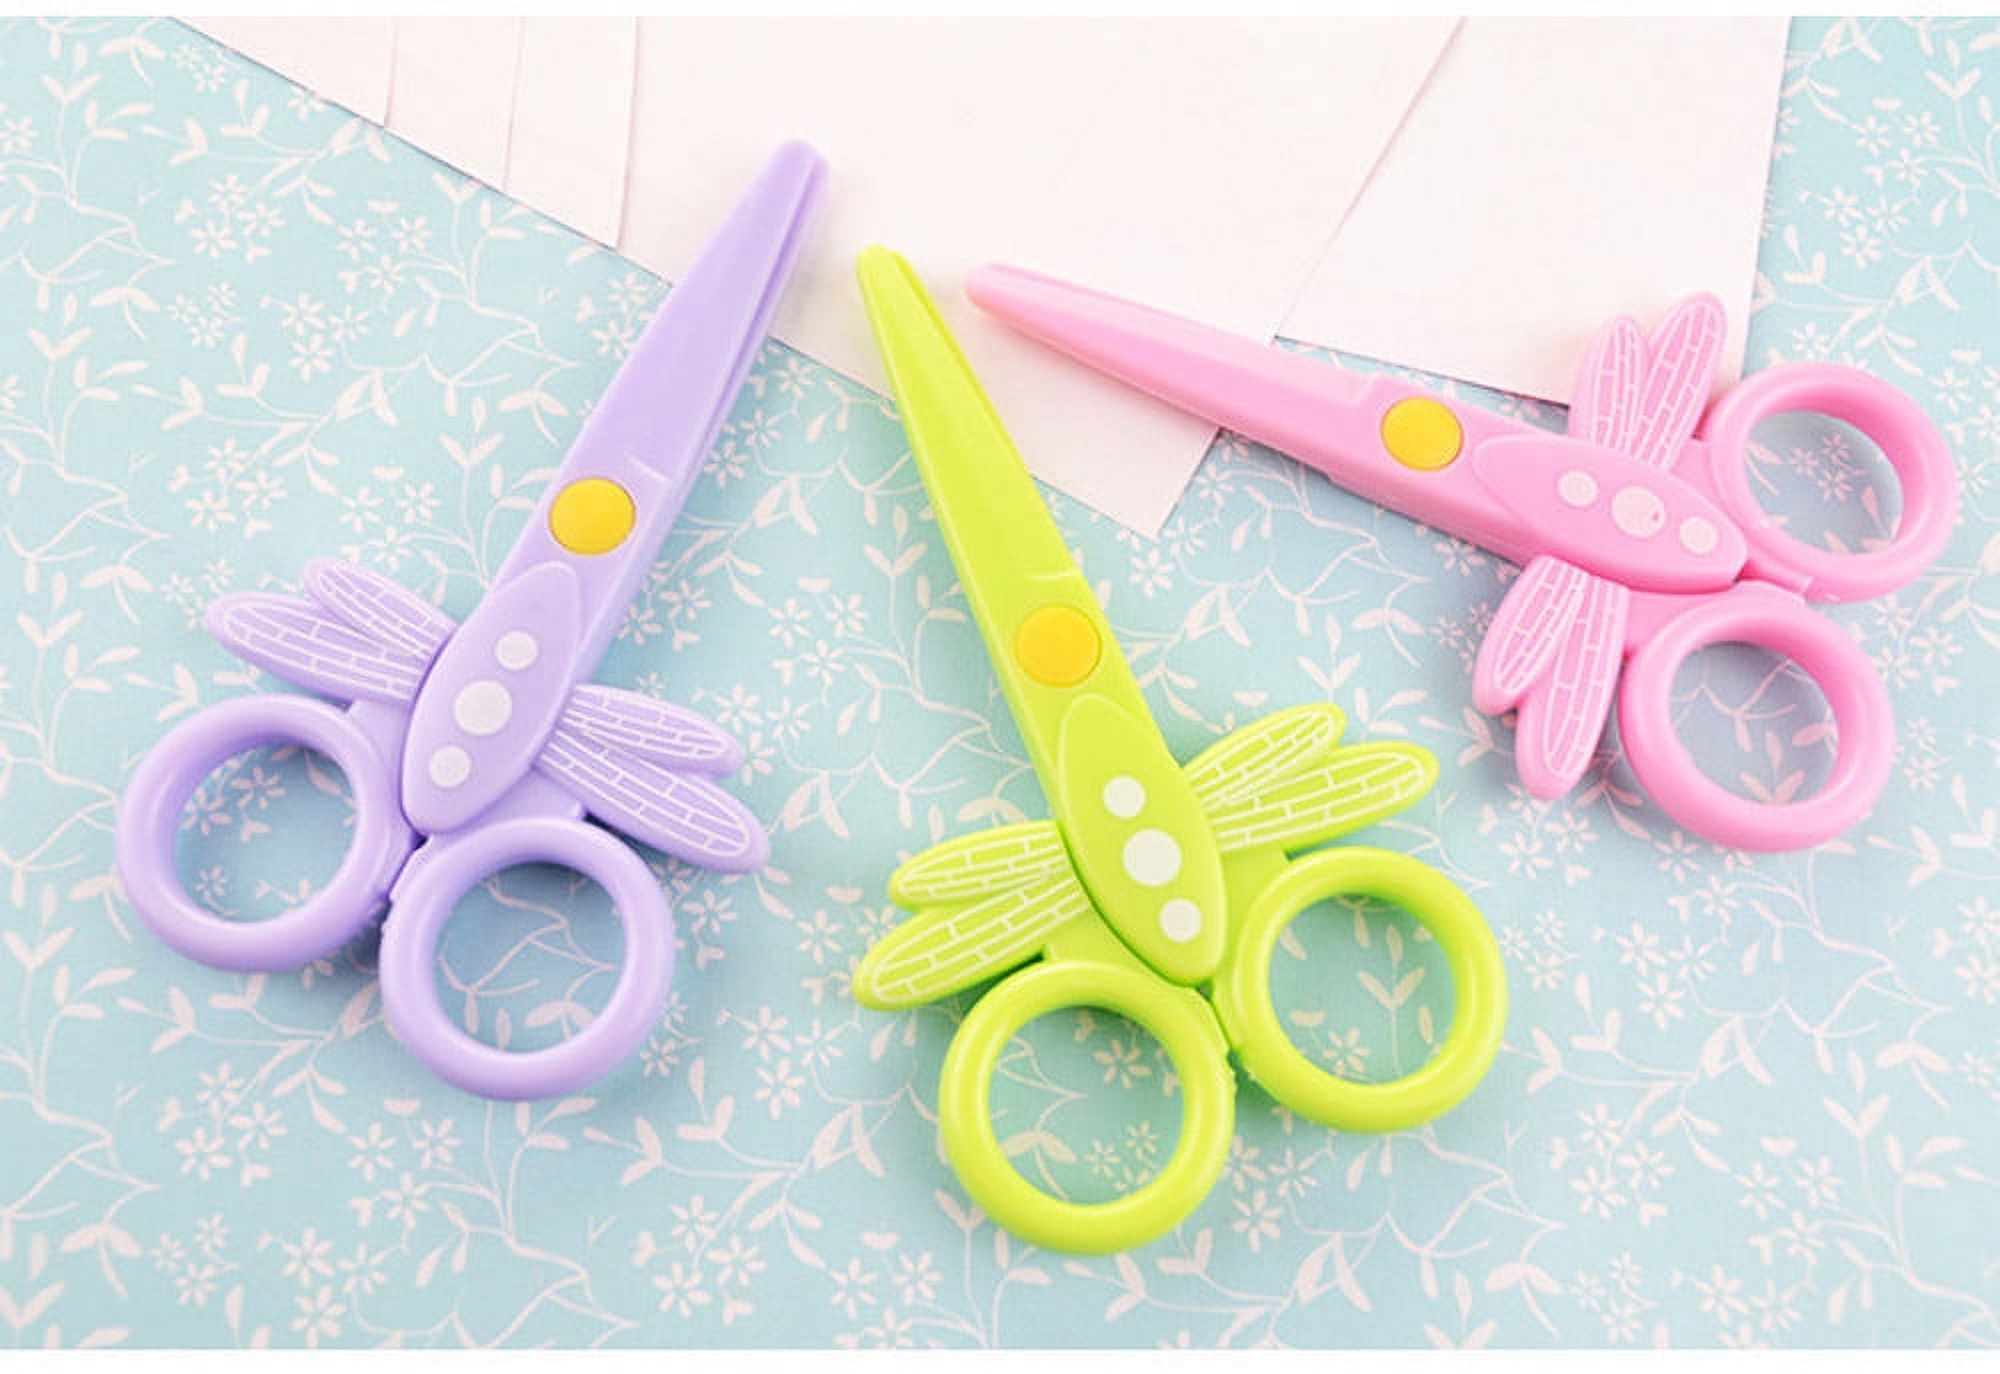 XMMSWDLA Scissors For Kids, Blunt Scissors, Small School Student Craft  Scissors, Sharp Stainless Steel Blades Safety, Cute Animal Shapes 